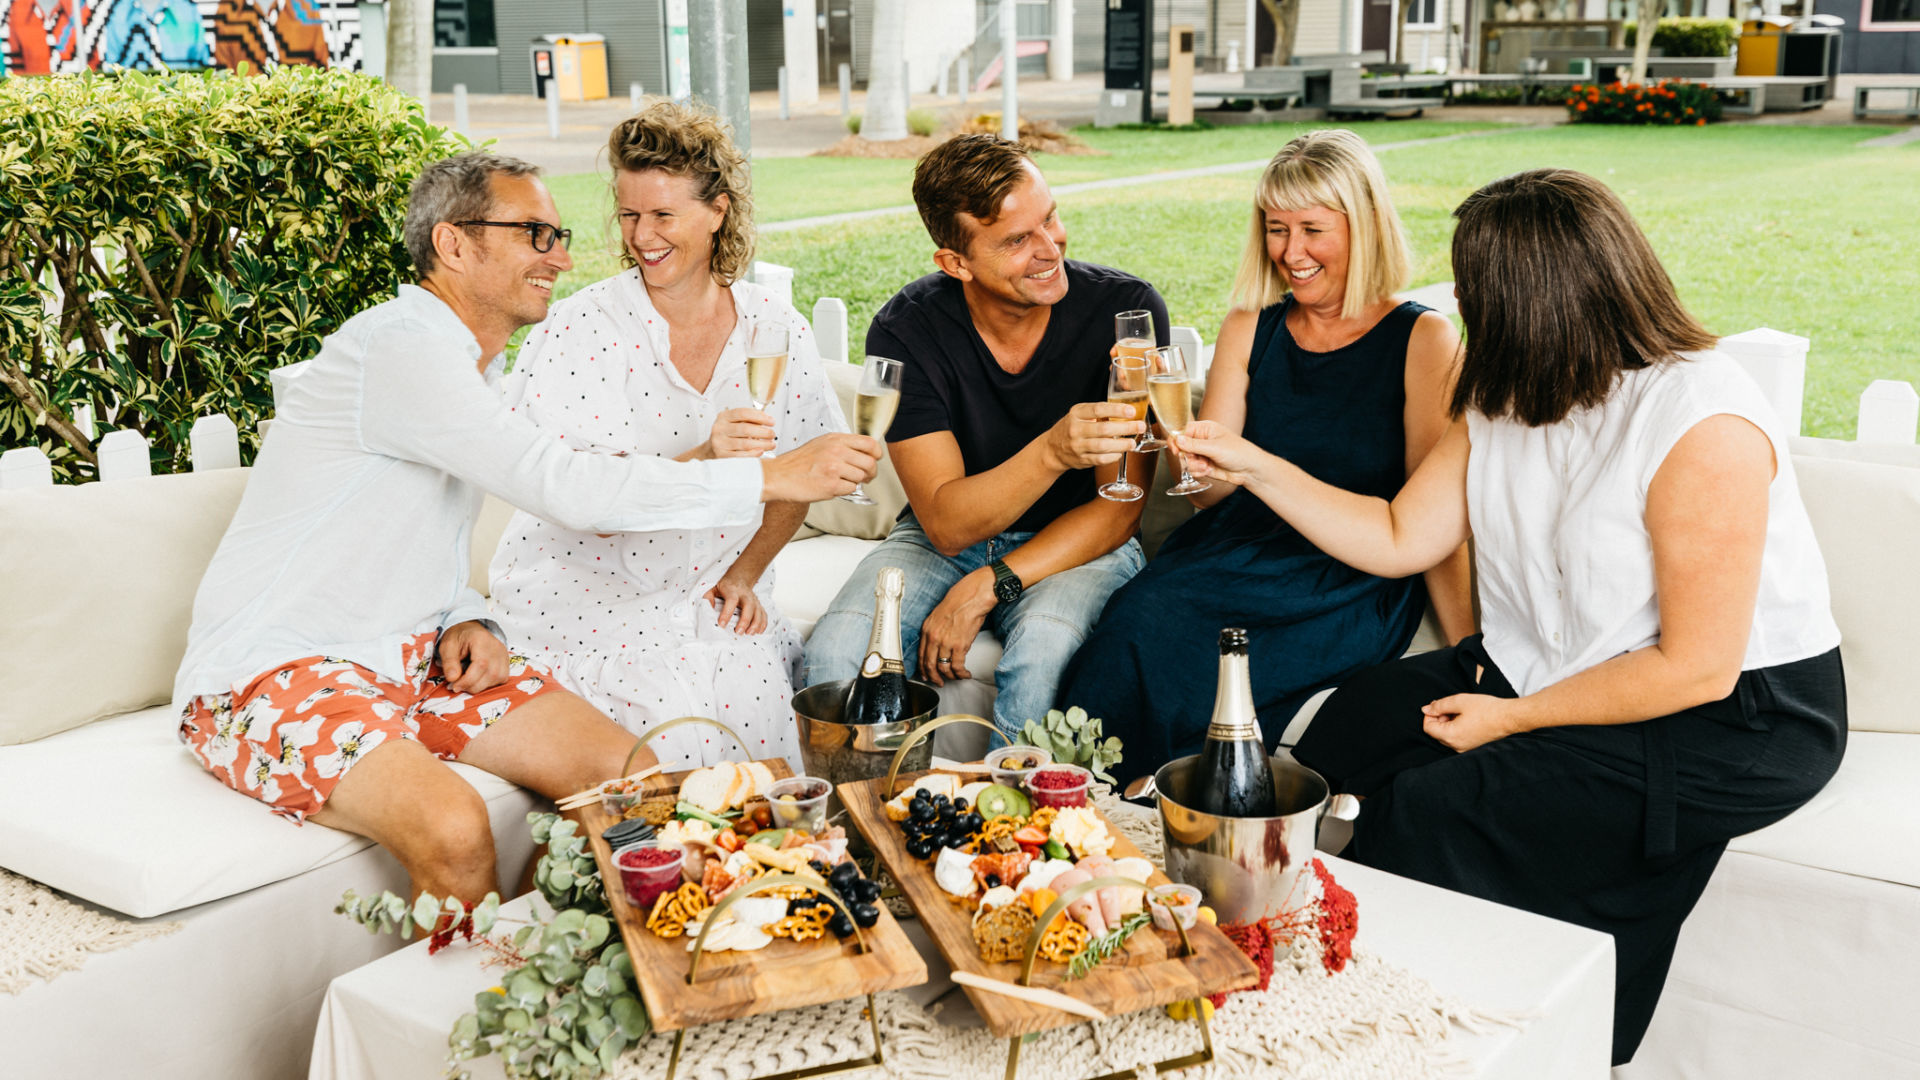 4 people sitting together talking and smiling with champagne in their hands, and a cheese board on the table in front of them